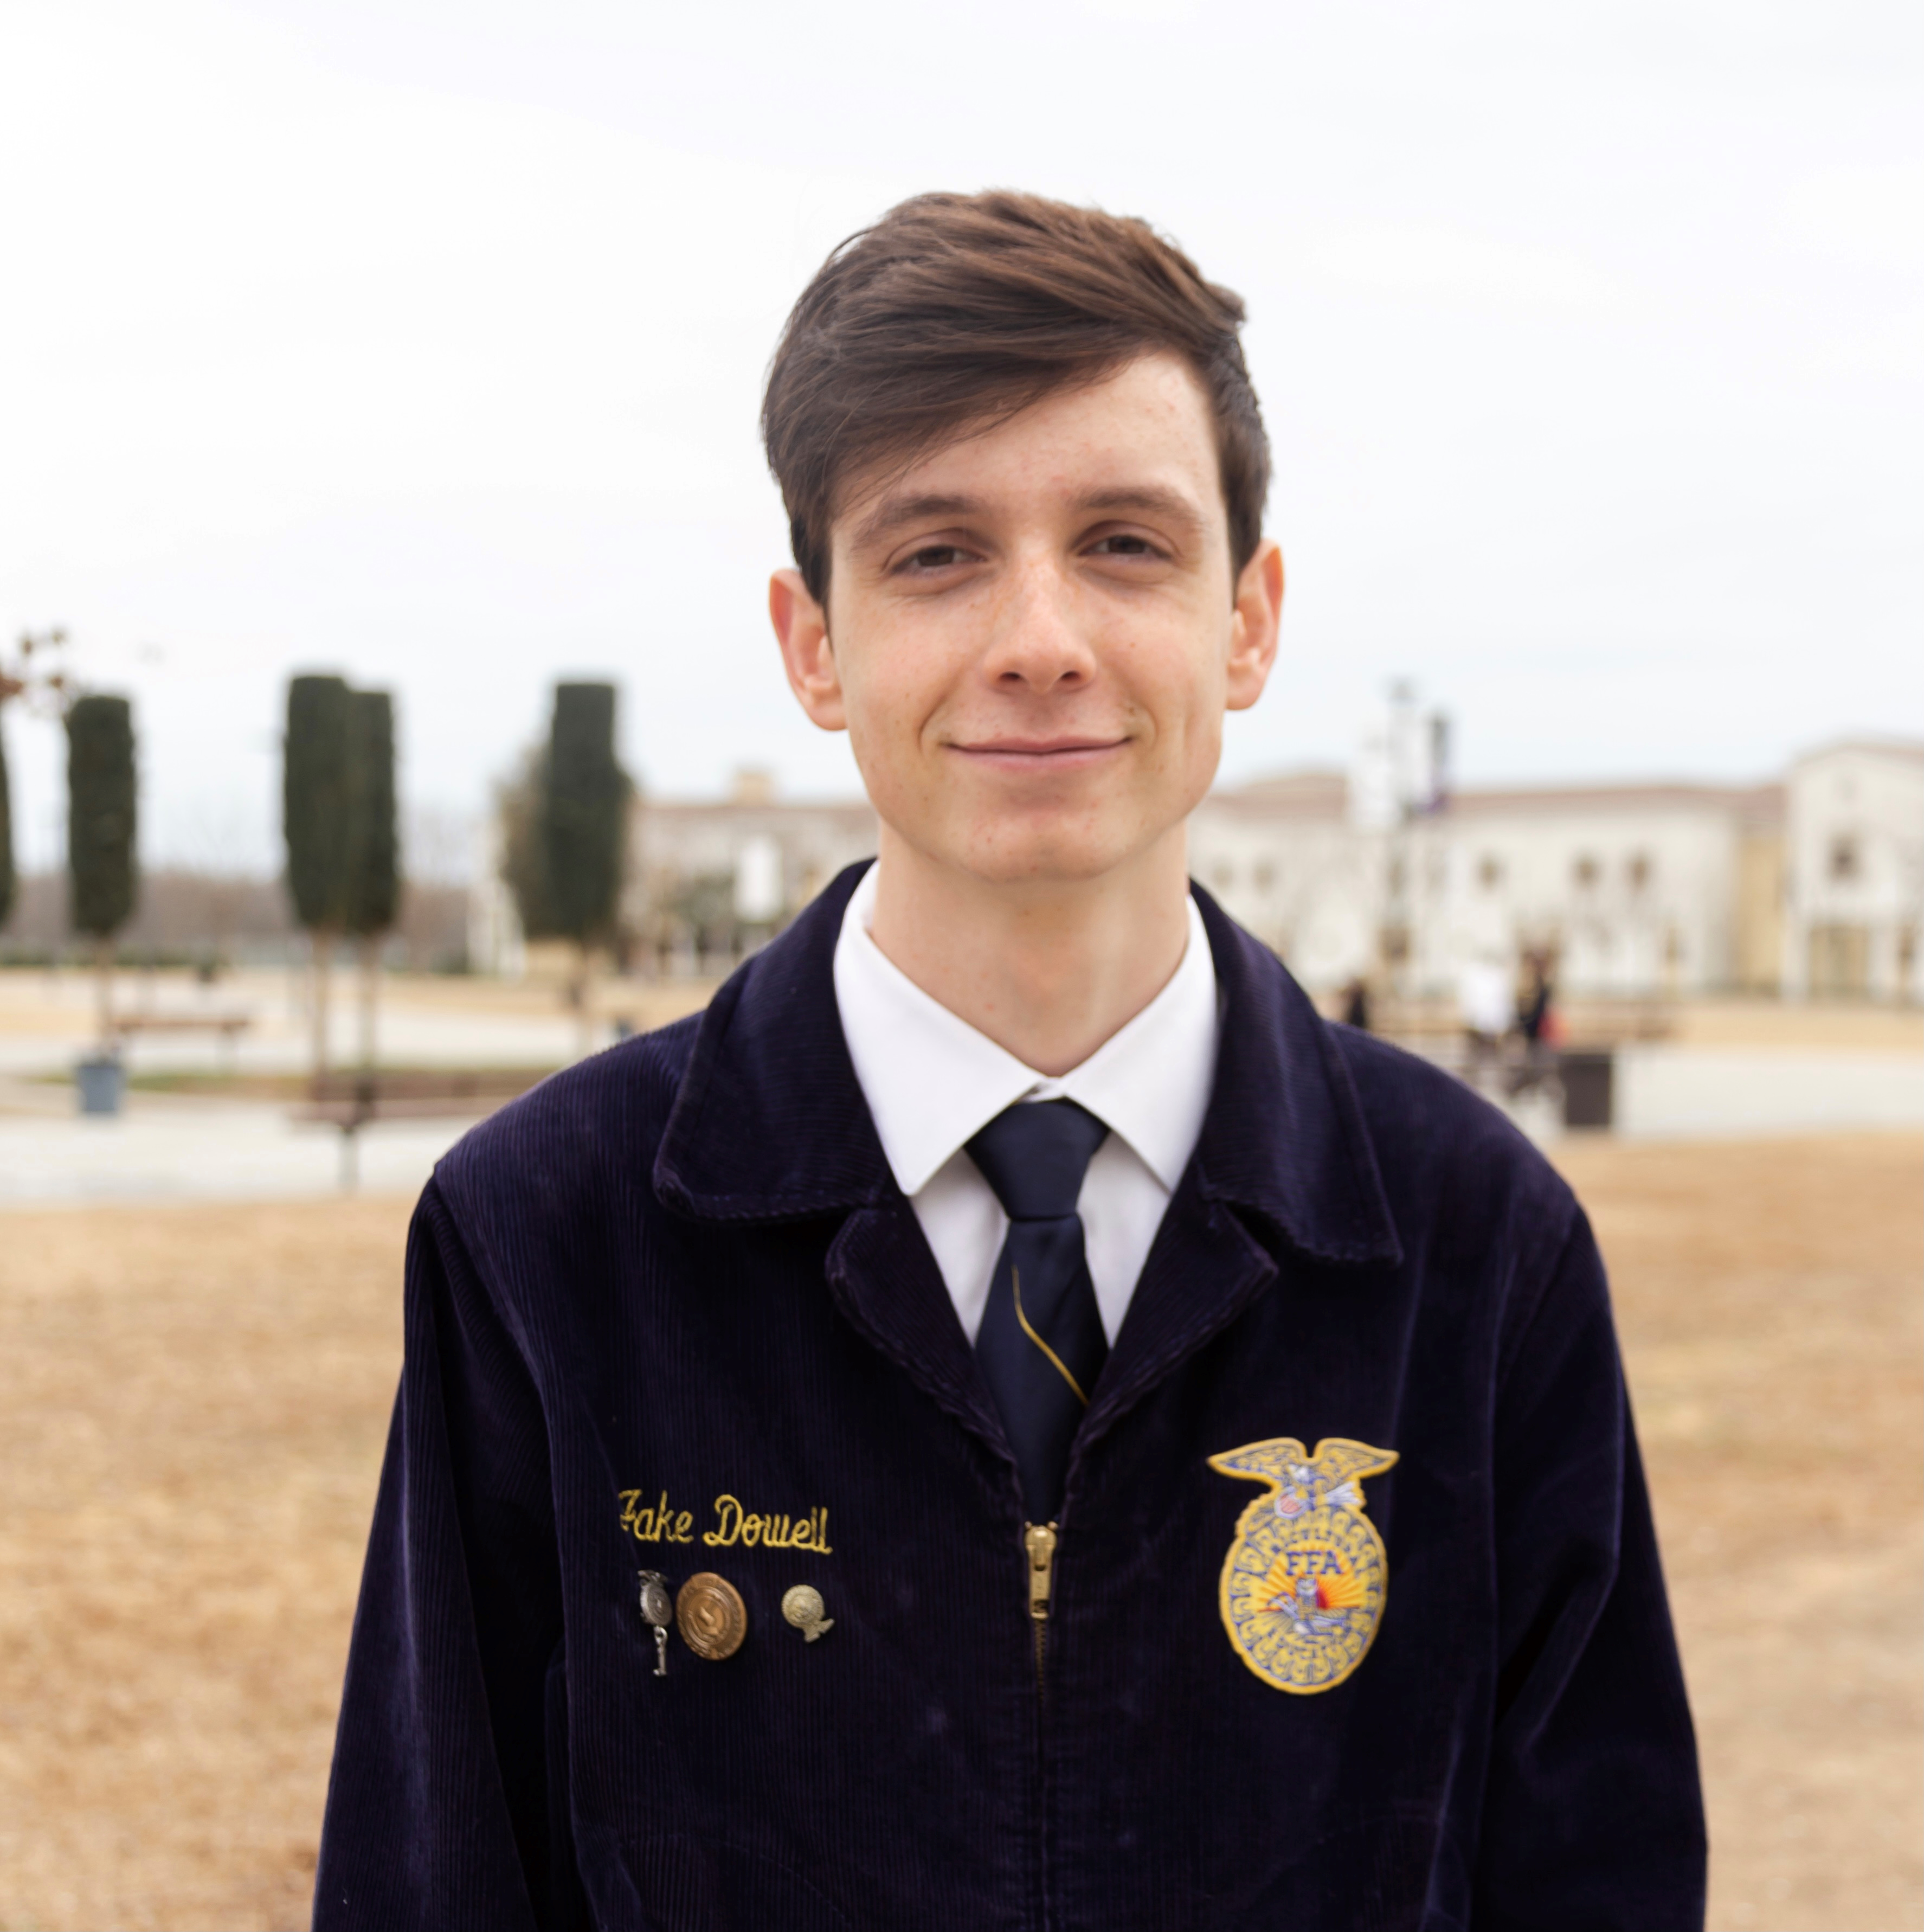 Jake Dowell, a student at Minarets High School in O’Neals, was elected State Reporter